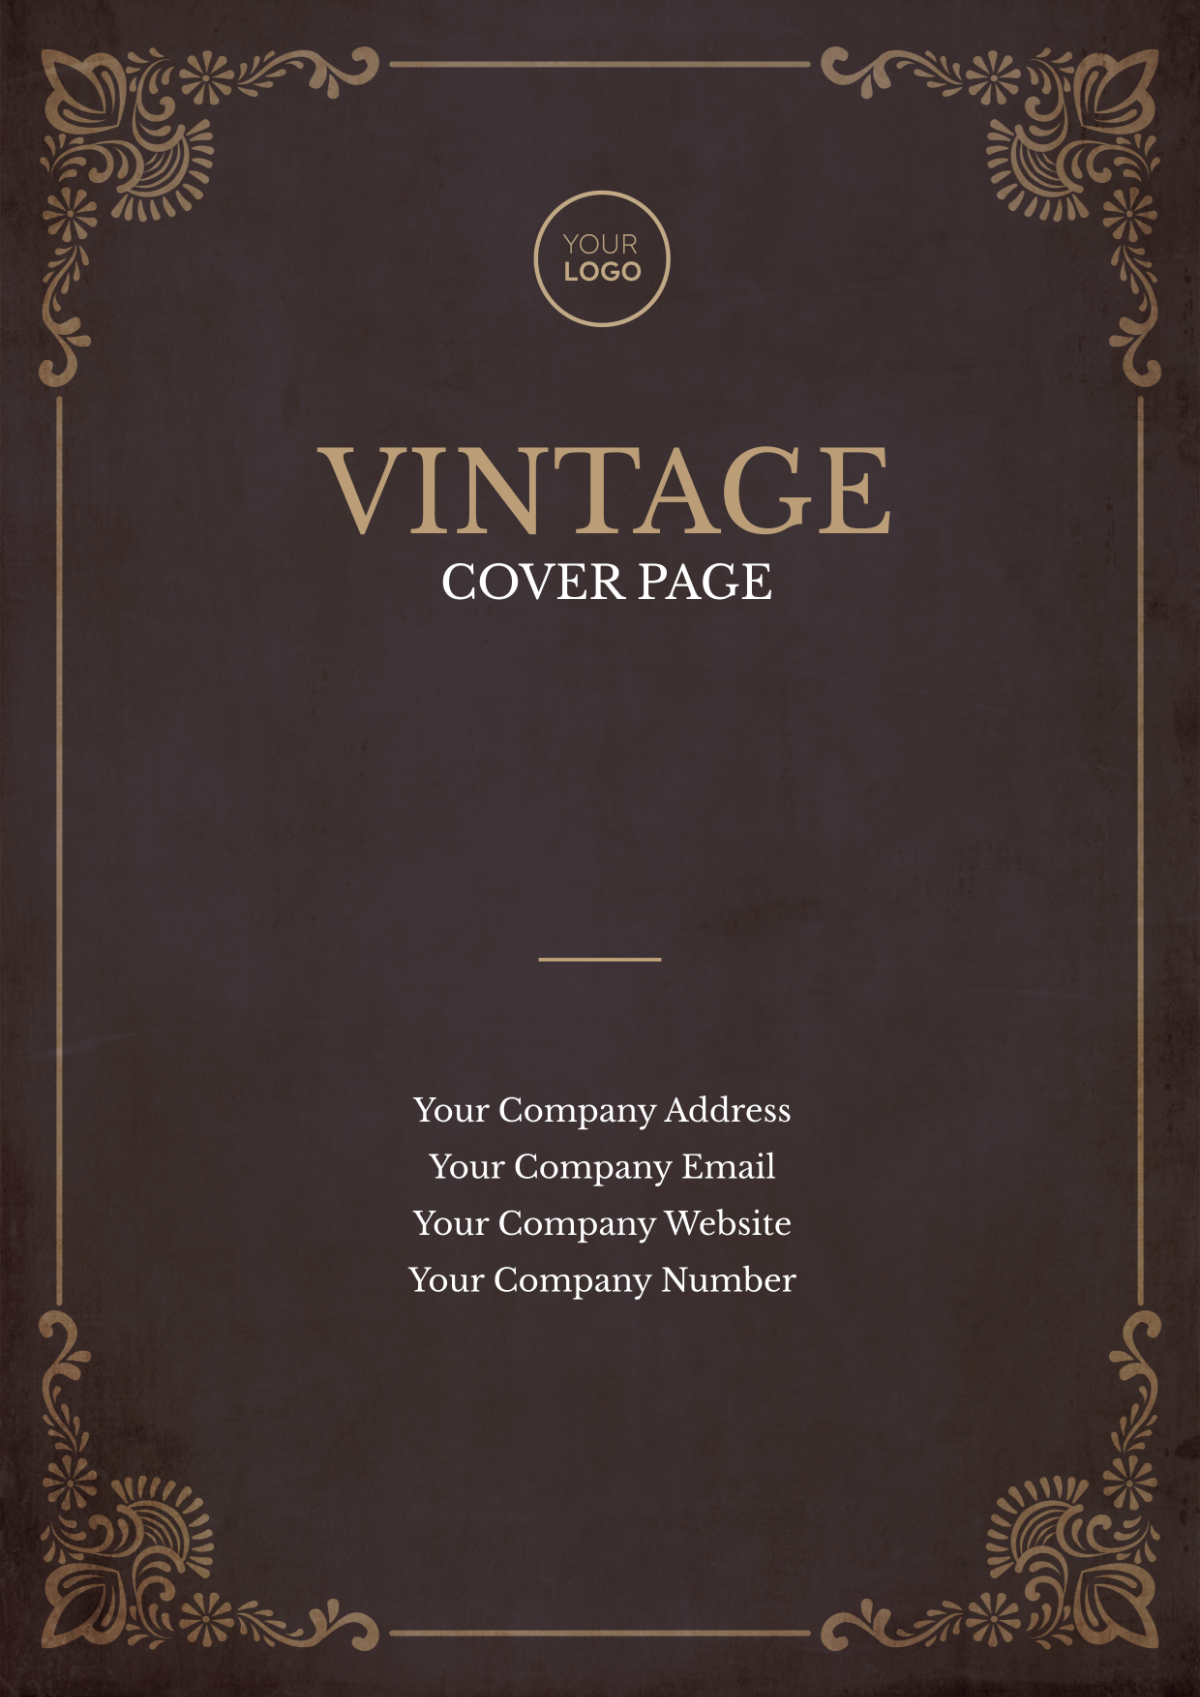 Vintage Logo Cover Page